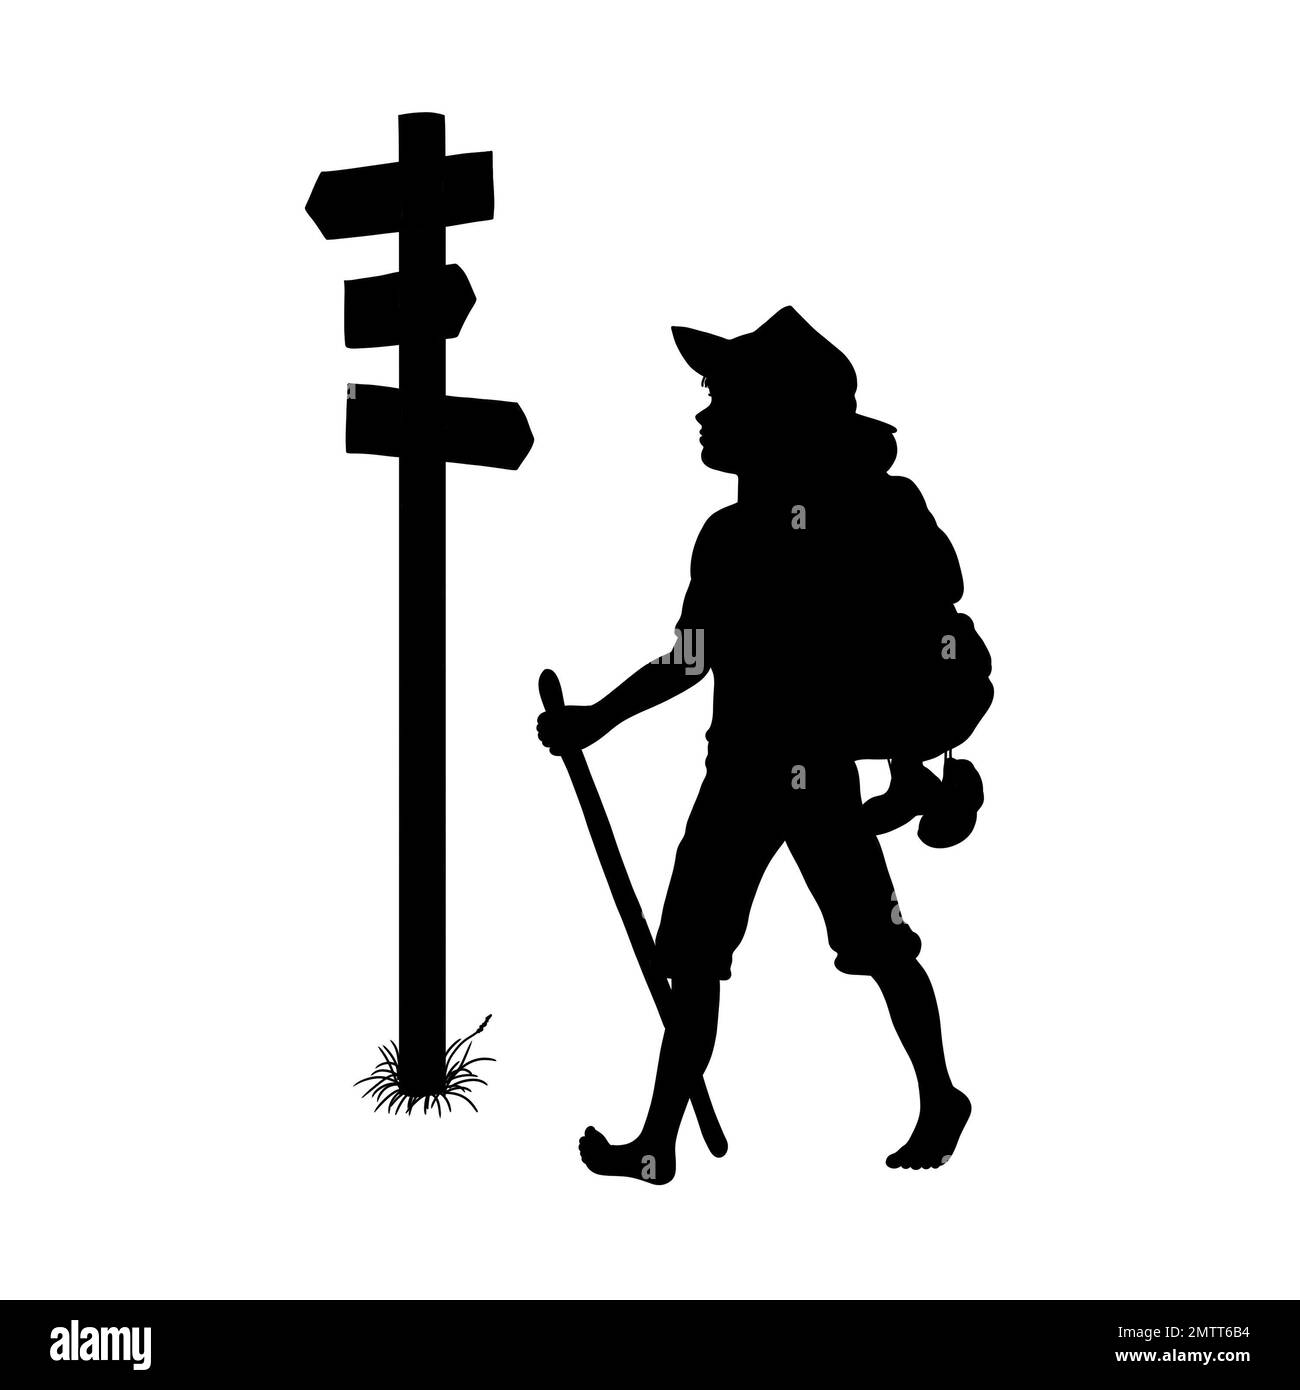 Silhouette in black of a boy or journeyman who is hiking barefoot with a backpack and walking stick or is on the waltz and is walking past a signpost Stock Photo